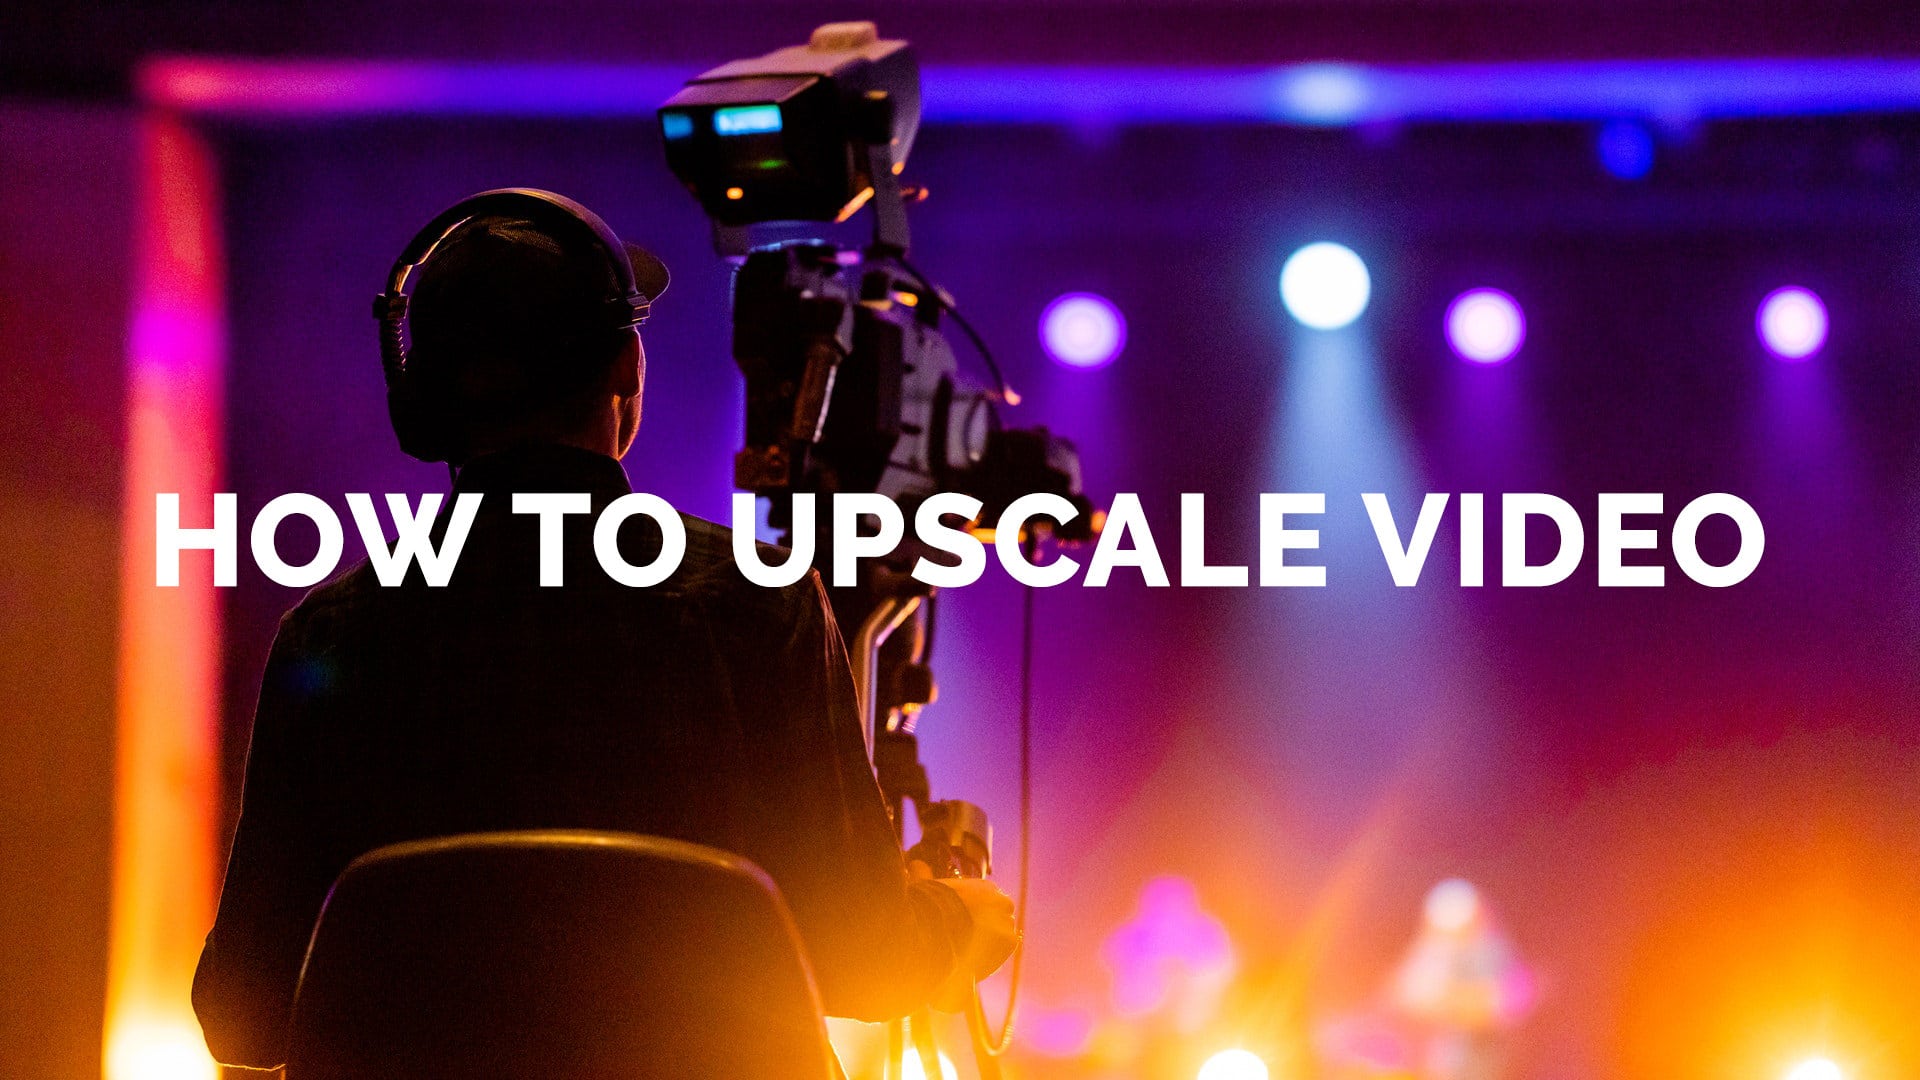 How to Upscale Video | Improve Quality & Increase Resolution